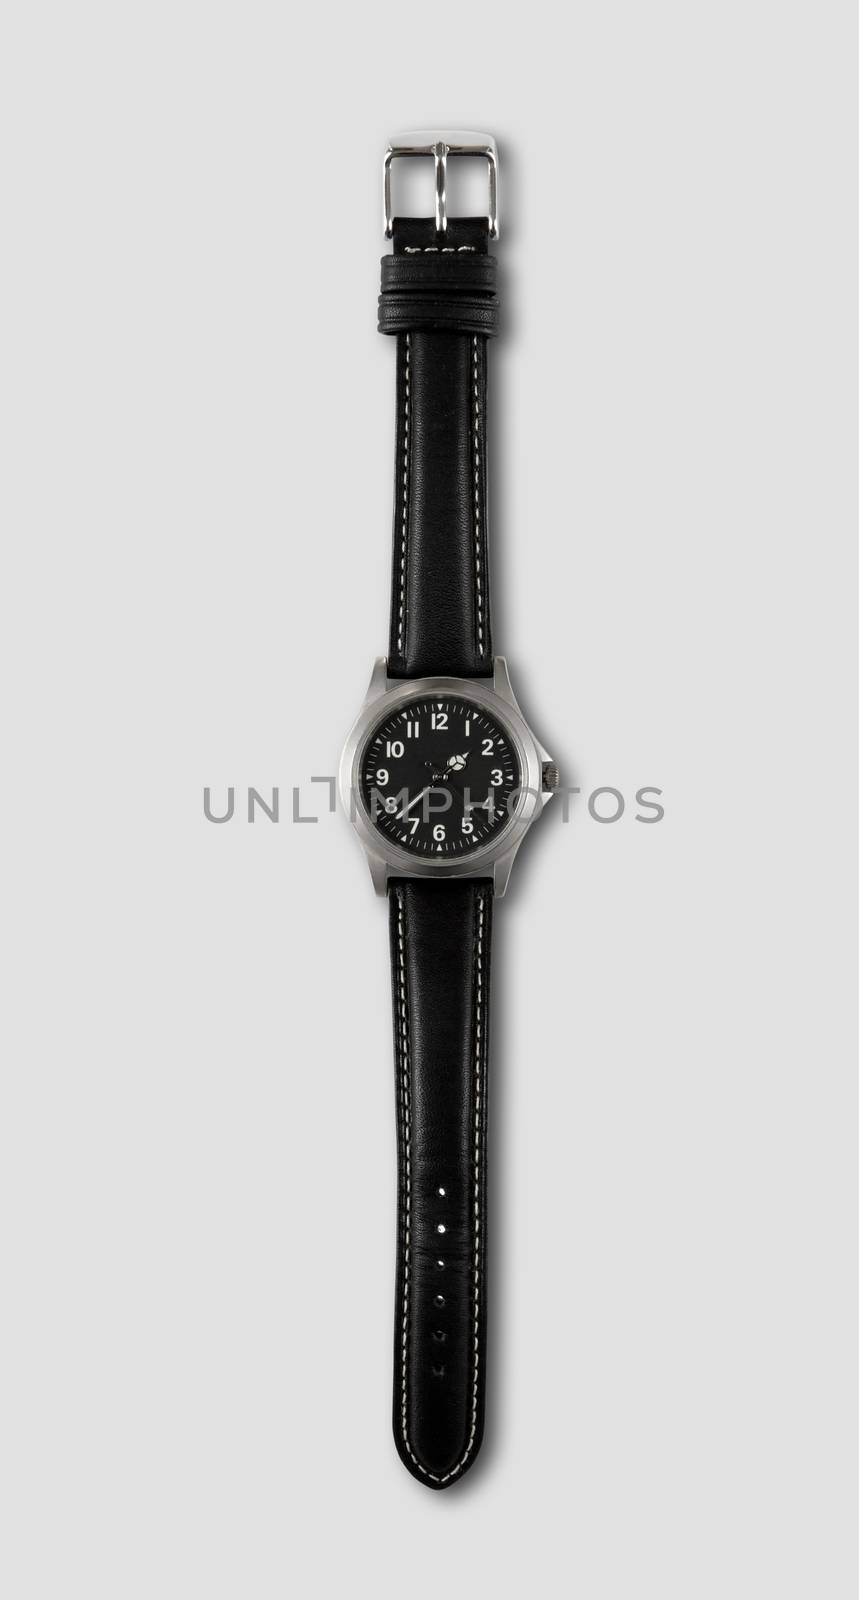 Wrist watch isolated on grey background by daboost